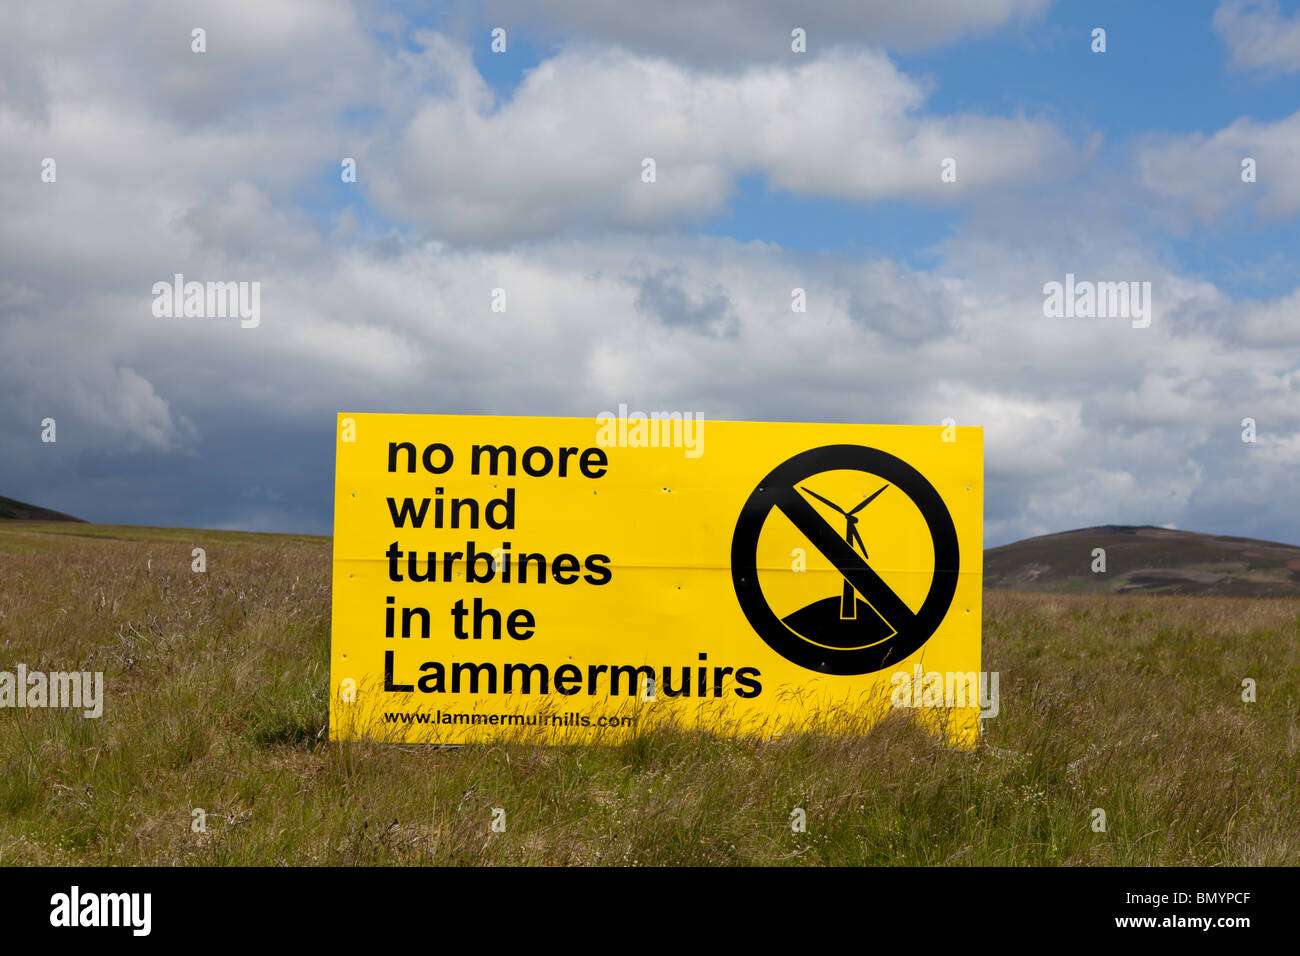 A sign protesting about more wind turbines on the Lammermuir Hills in the Scottish Borders Stock Photo